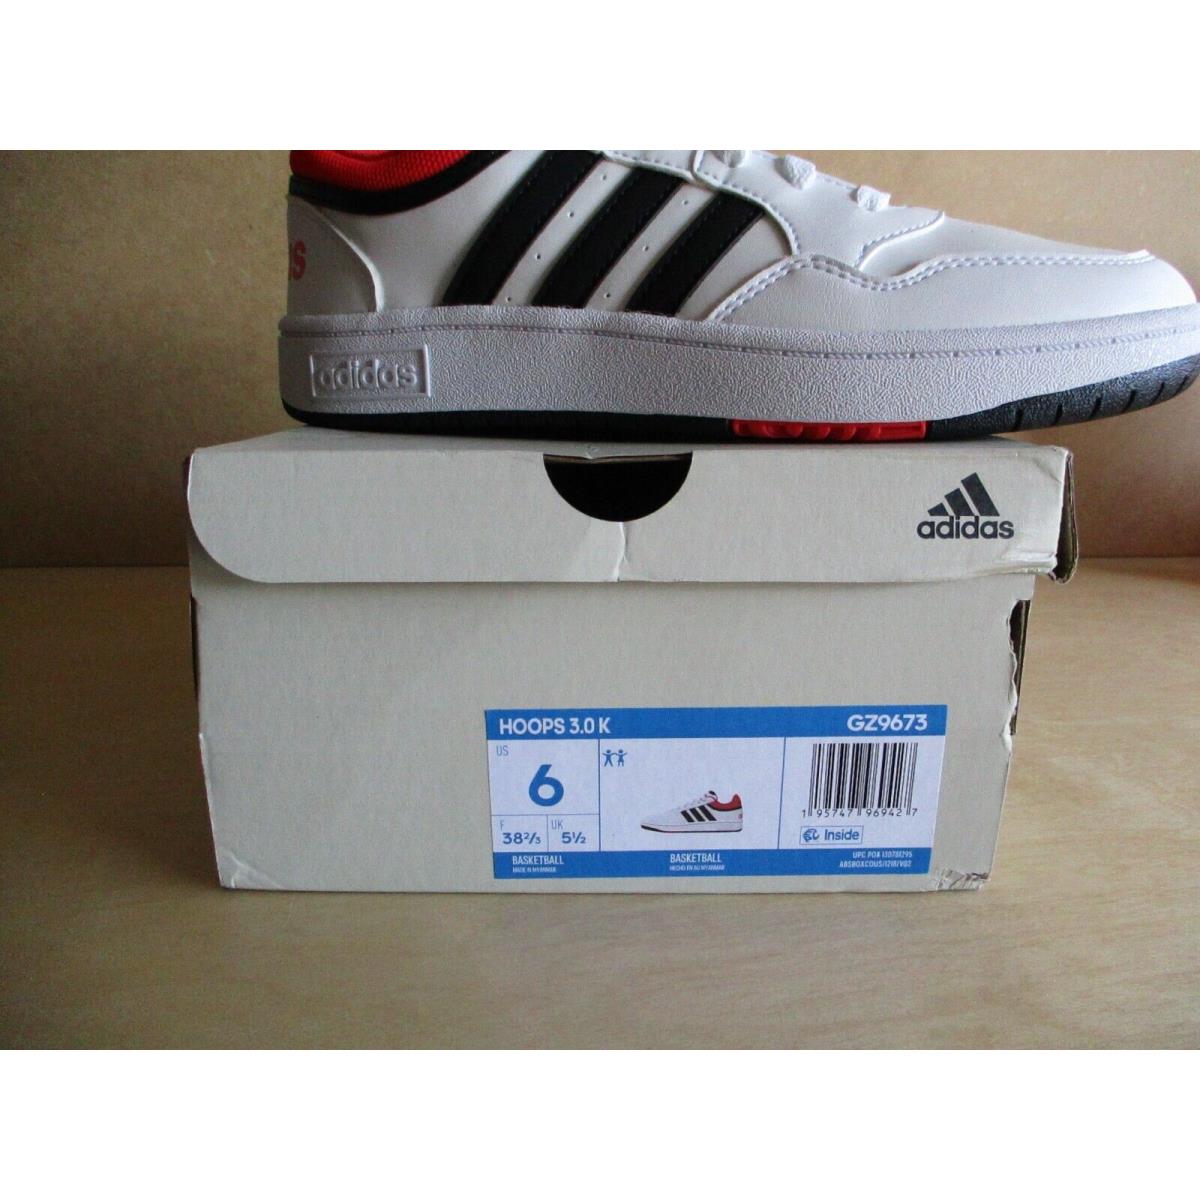 Adidas shoes Hoops - White 3